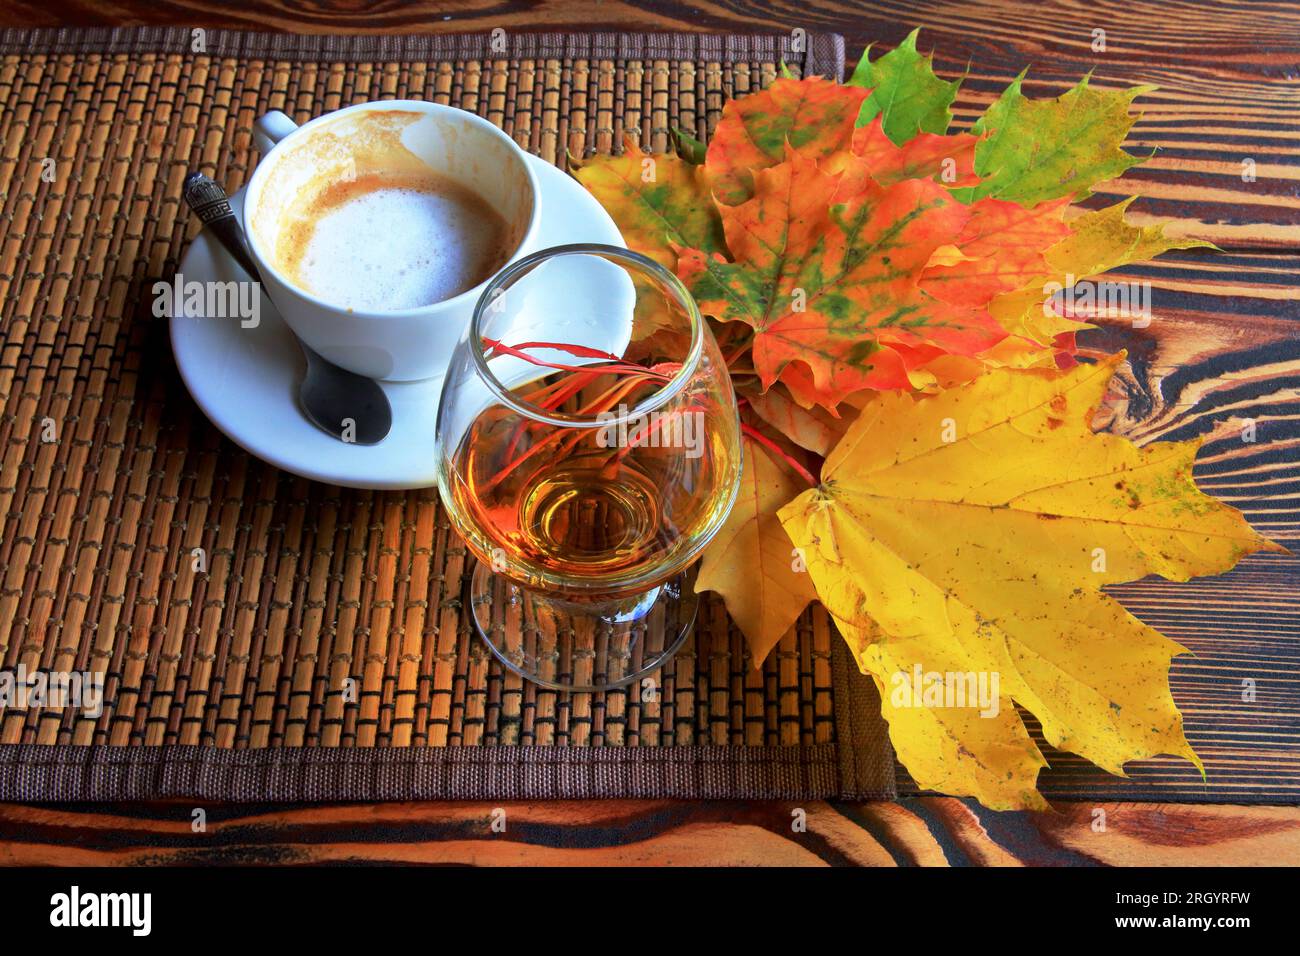 the photo shows an autumn still life with a cup of coffee, a glass of brandy and bright leaves. Stock Photo